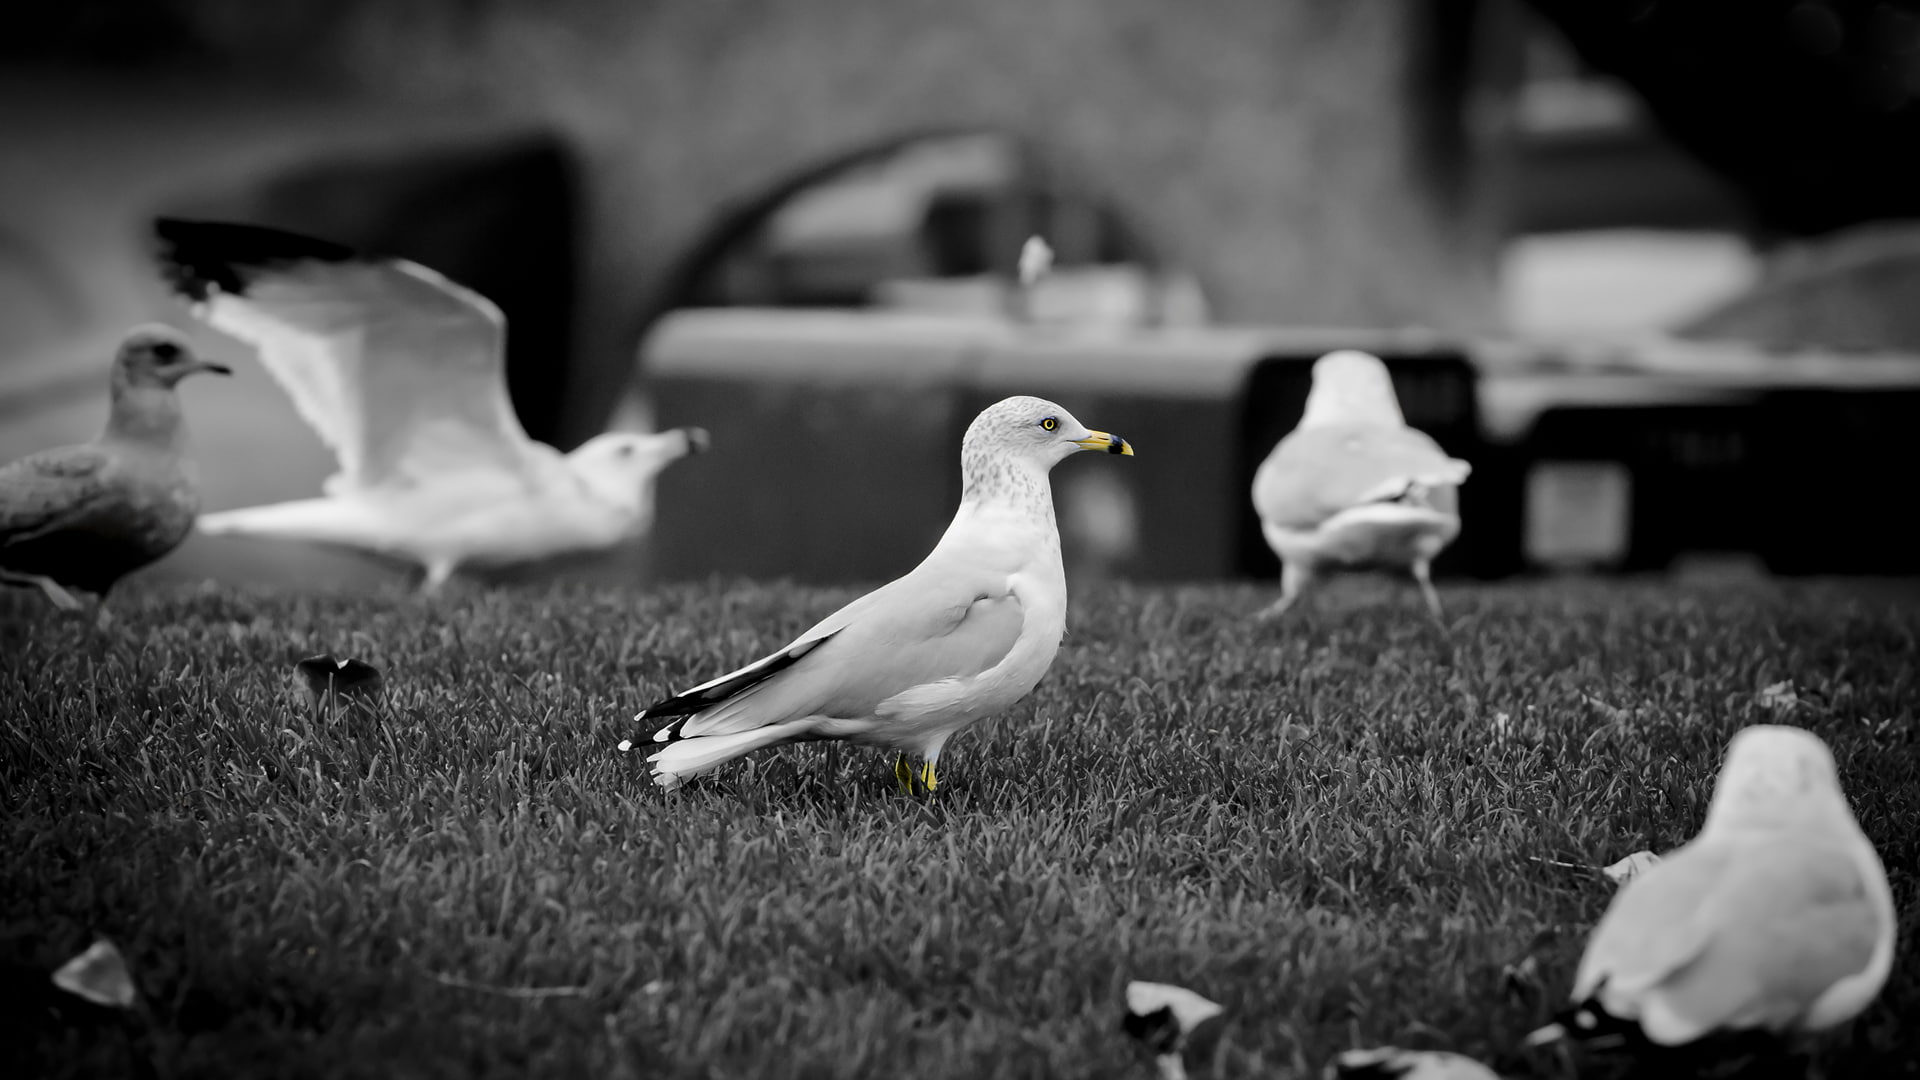 BW Colorsplash Seagulls Birds HD, gray scale group of seagull bird